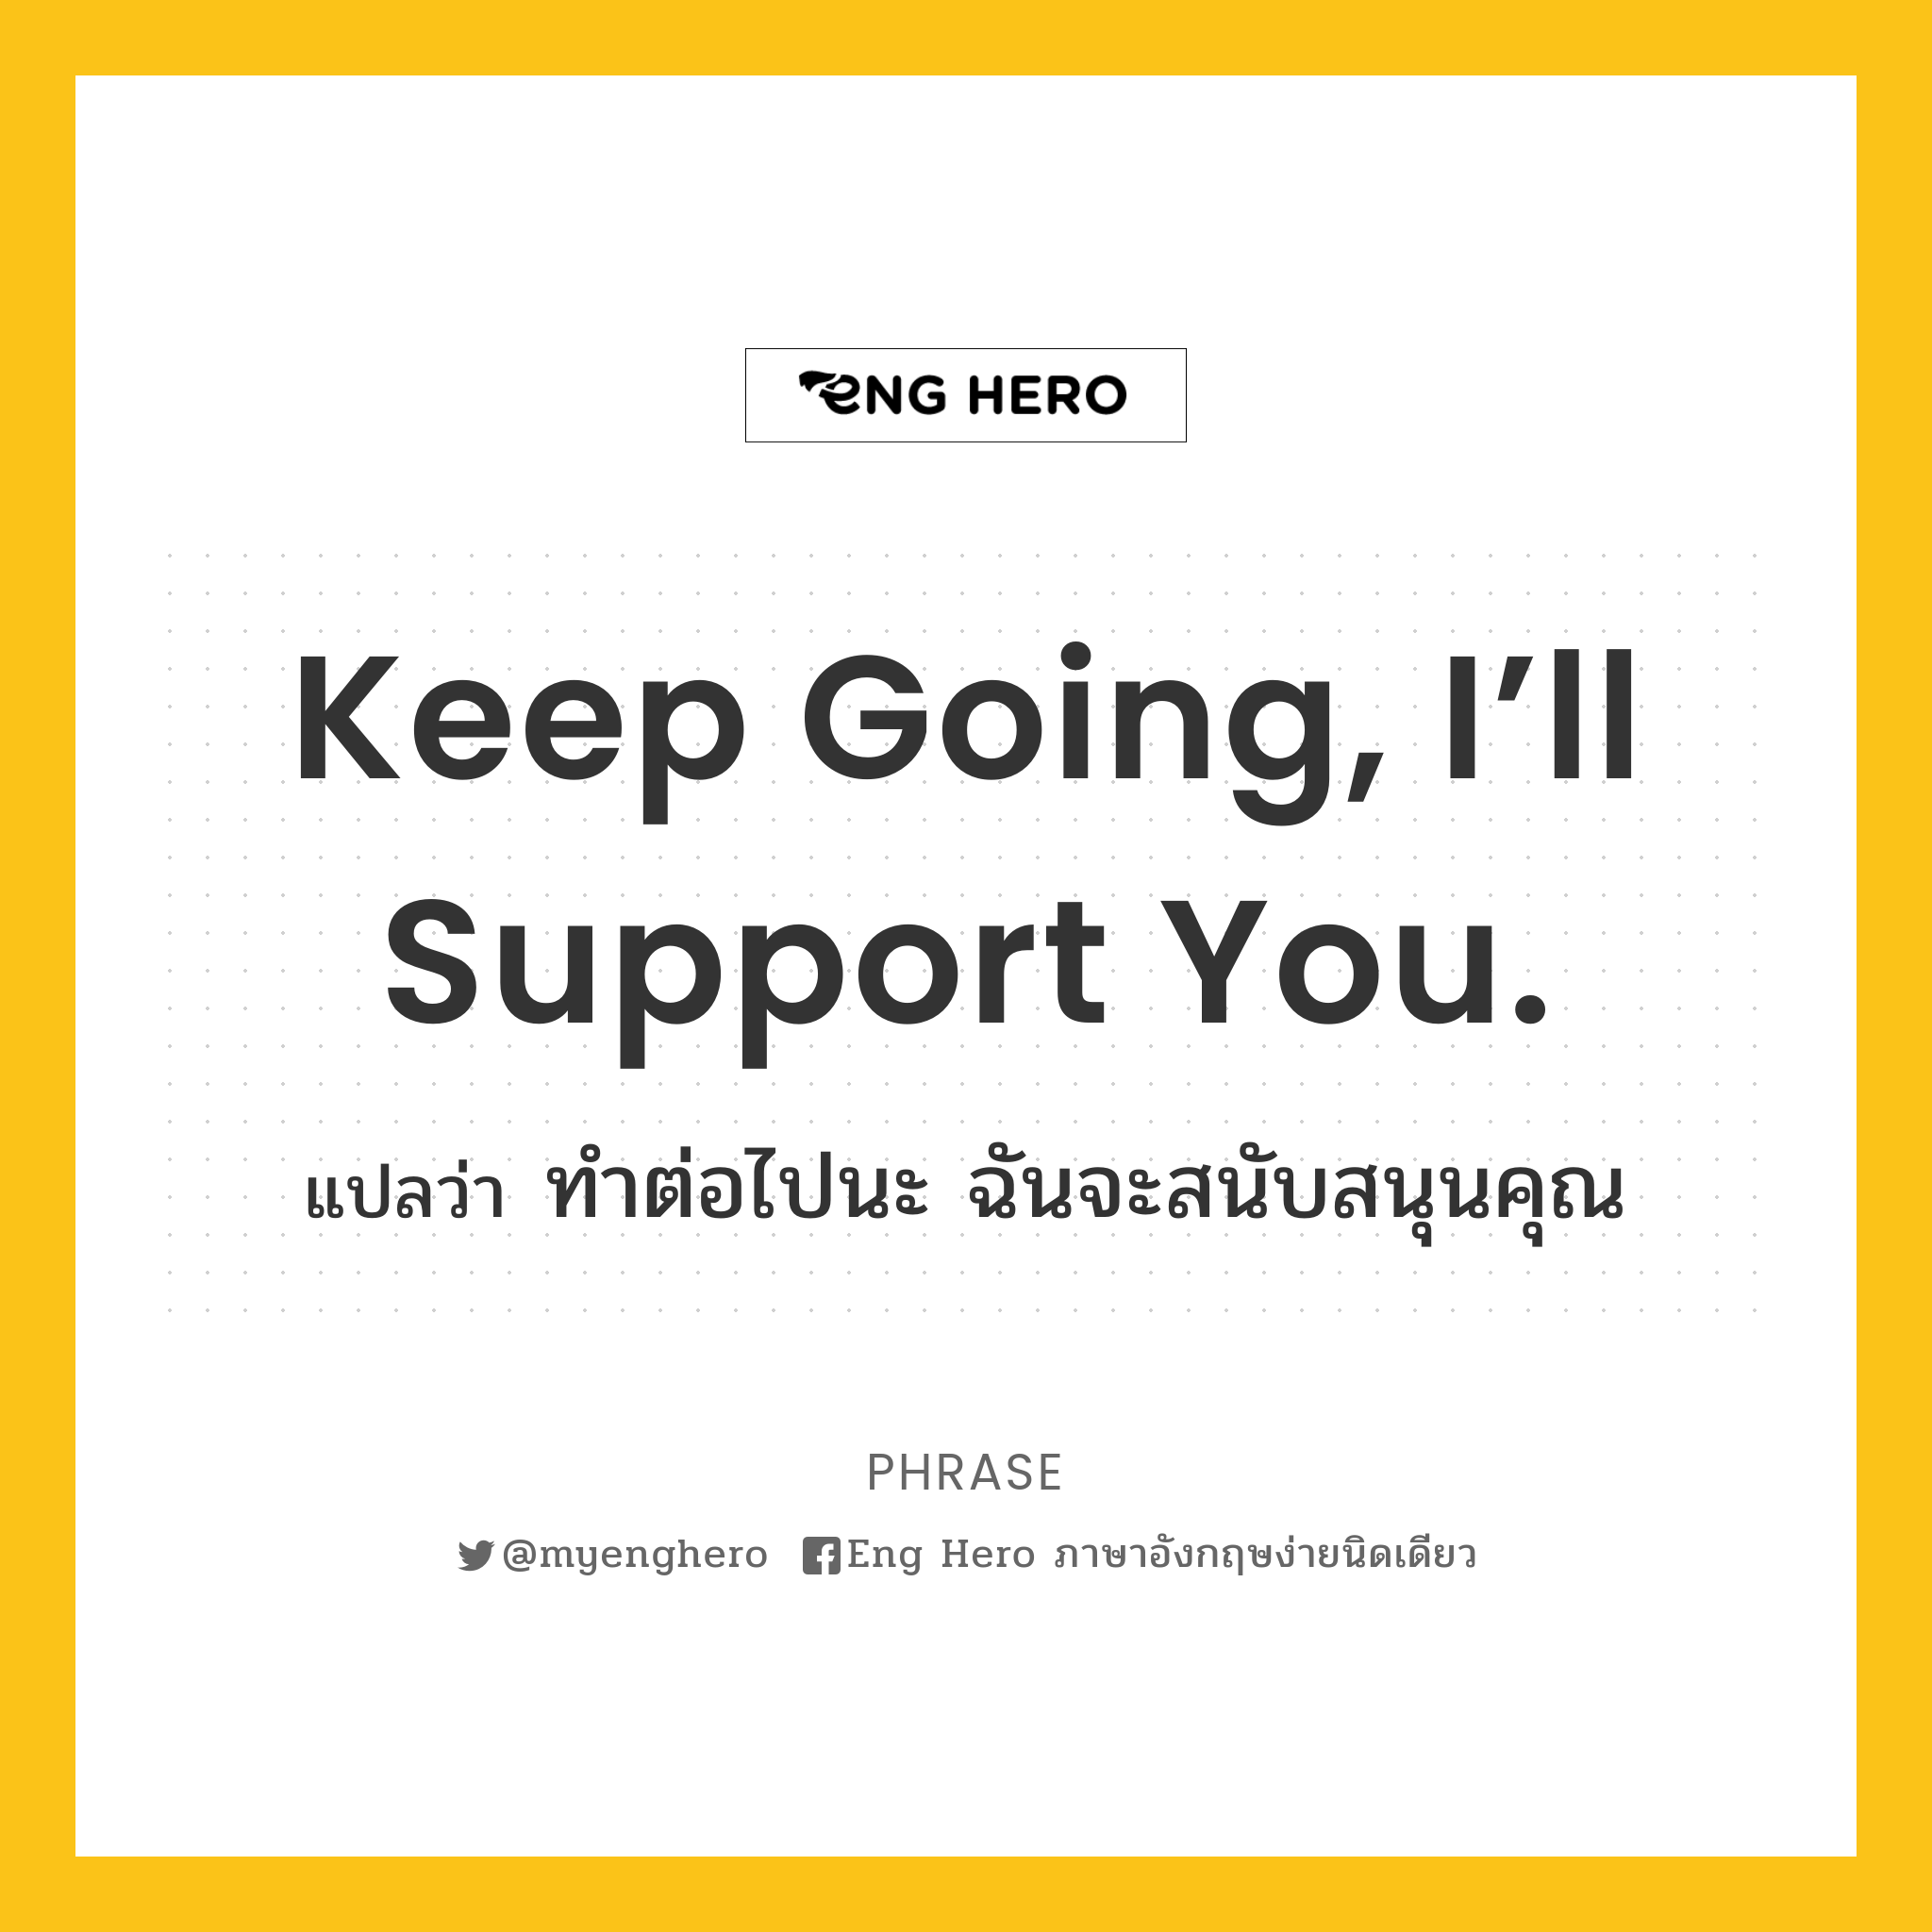 Keep going, I’ll support you.